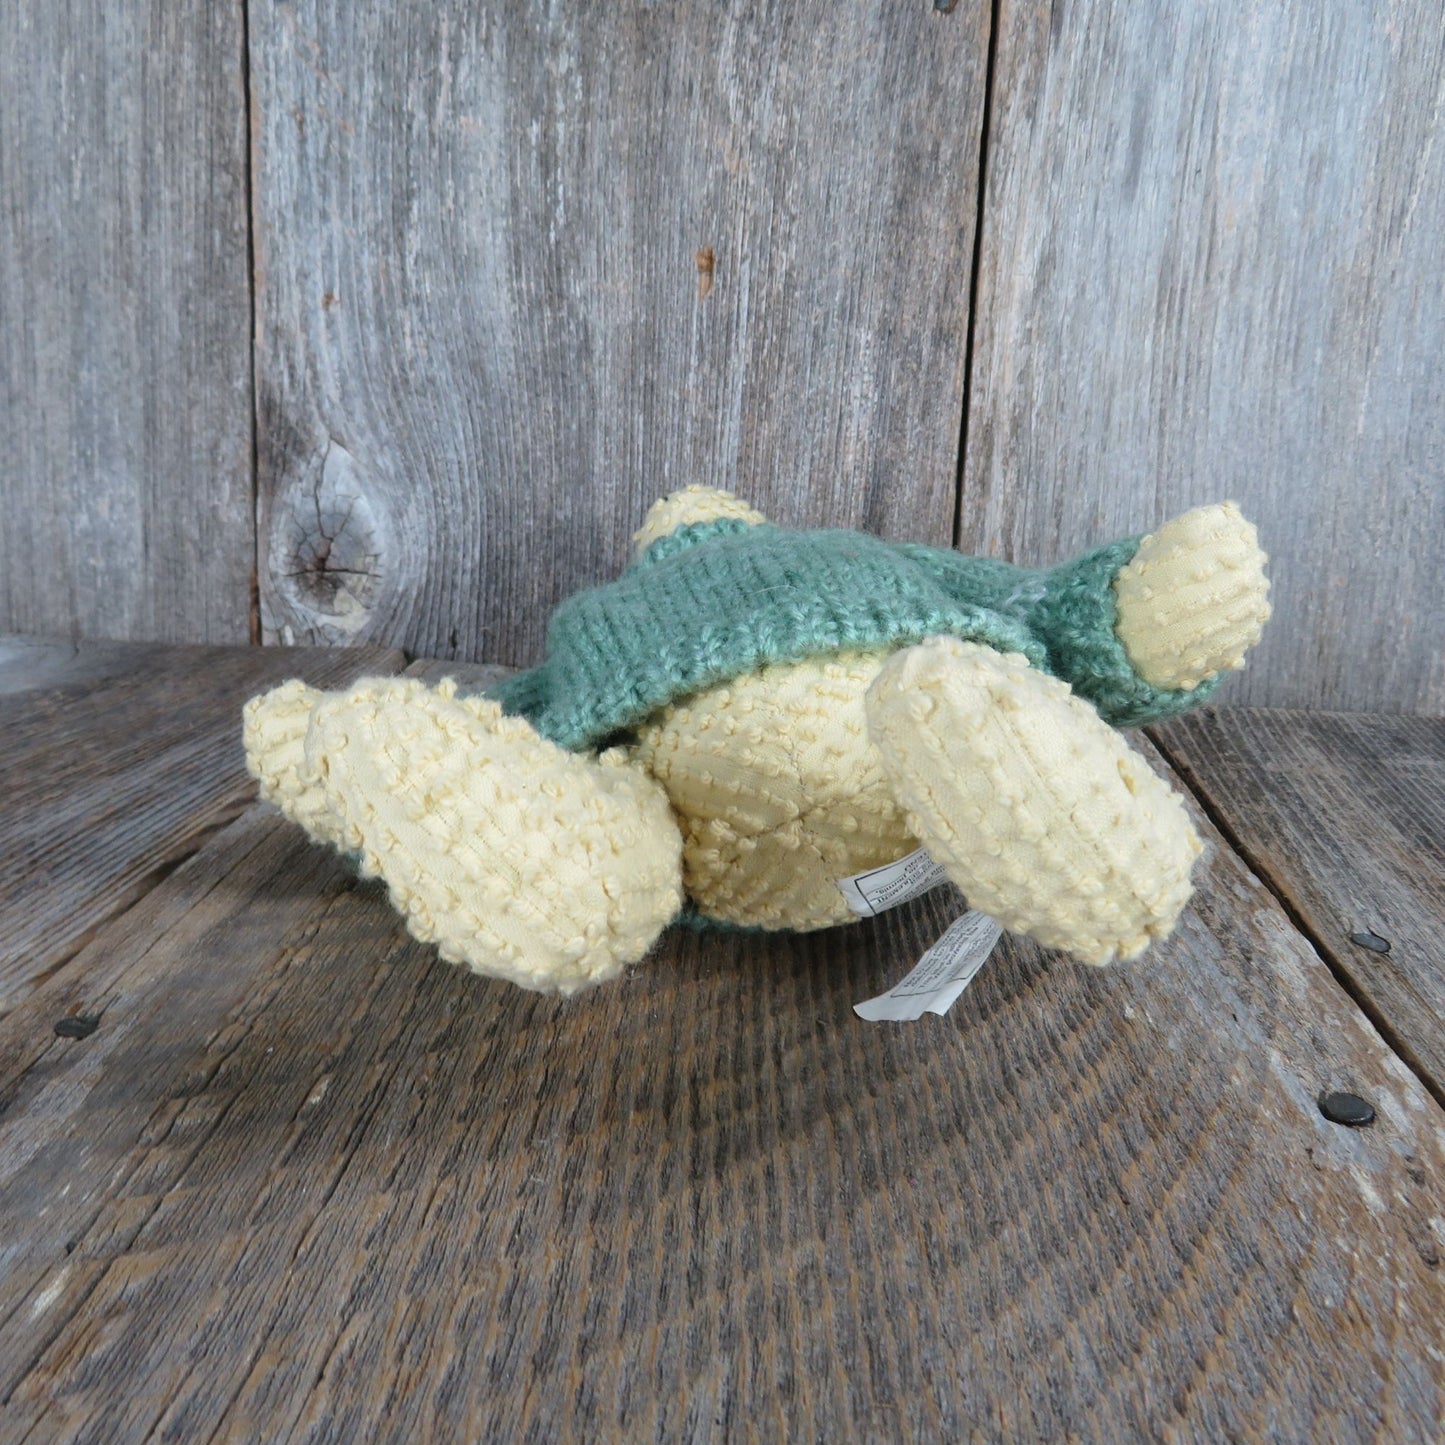 Vintage Teddy Bear Plush Jointed with Green Sweater Chenille Type Fabric Stuffed Animal